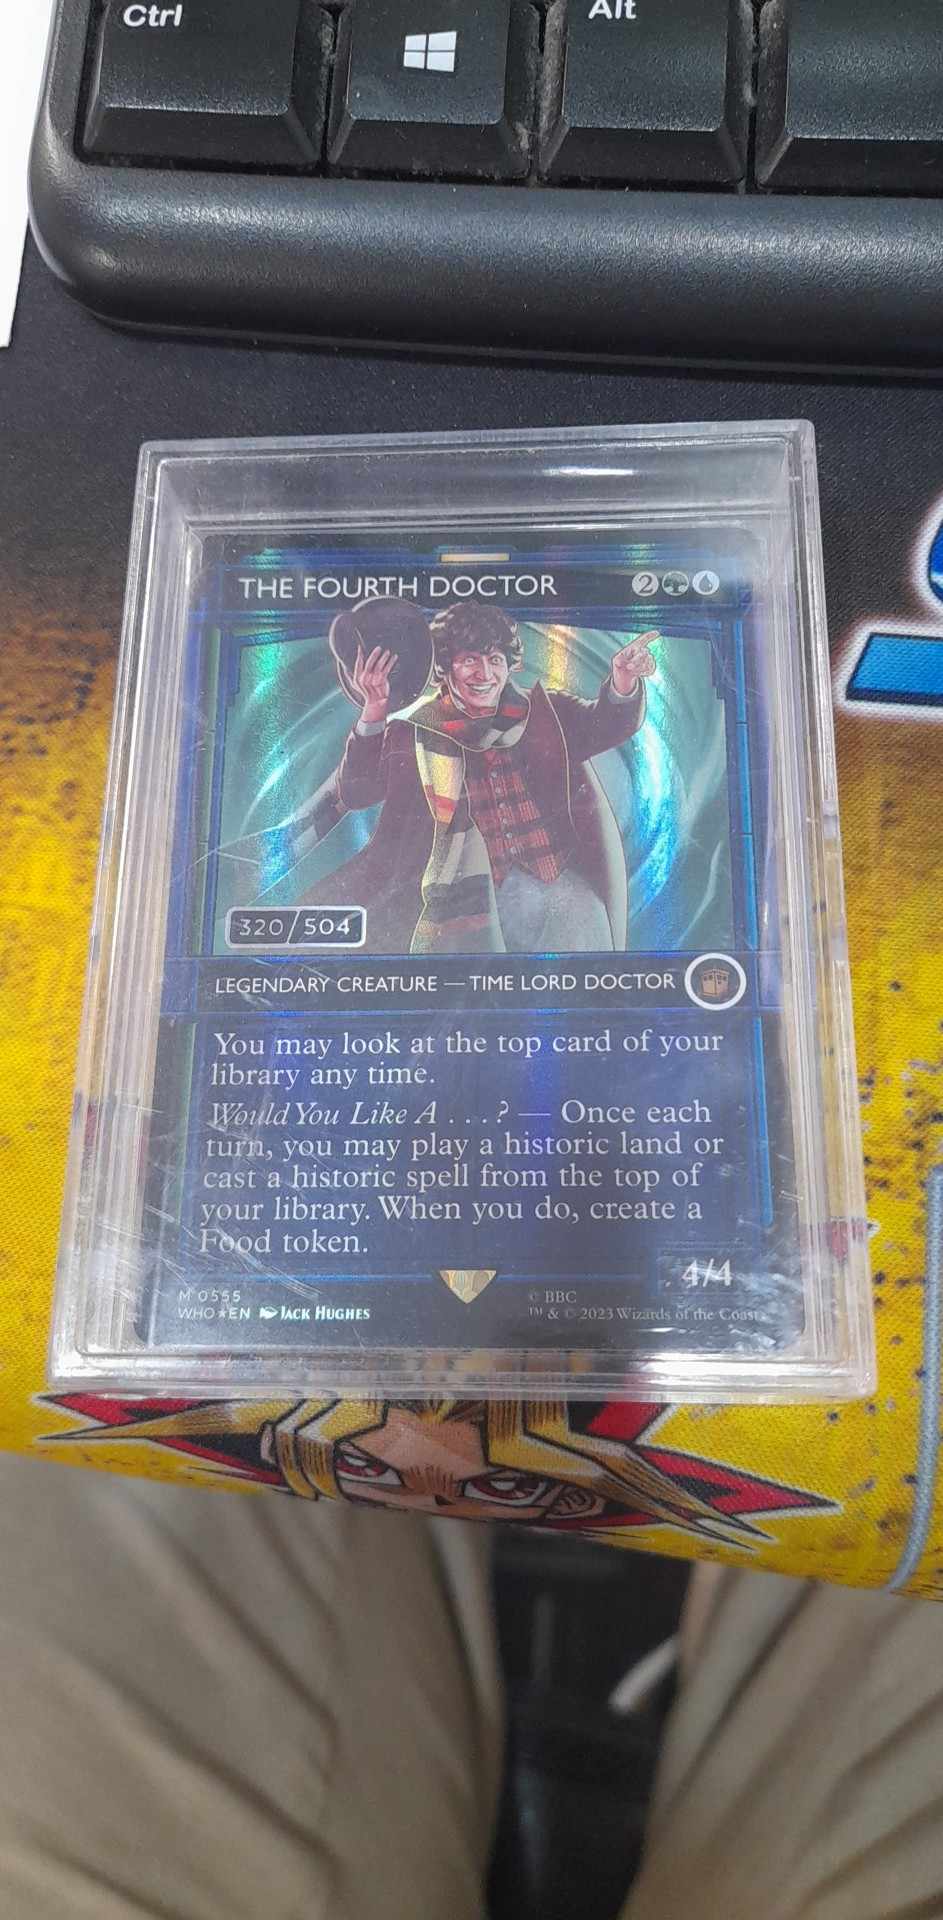 The Fourth Doctor (Serialized) [Doctor Who] | Shuffle n Cut Hobbies & Games